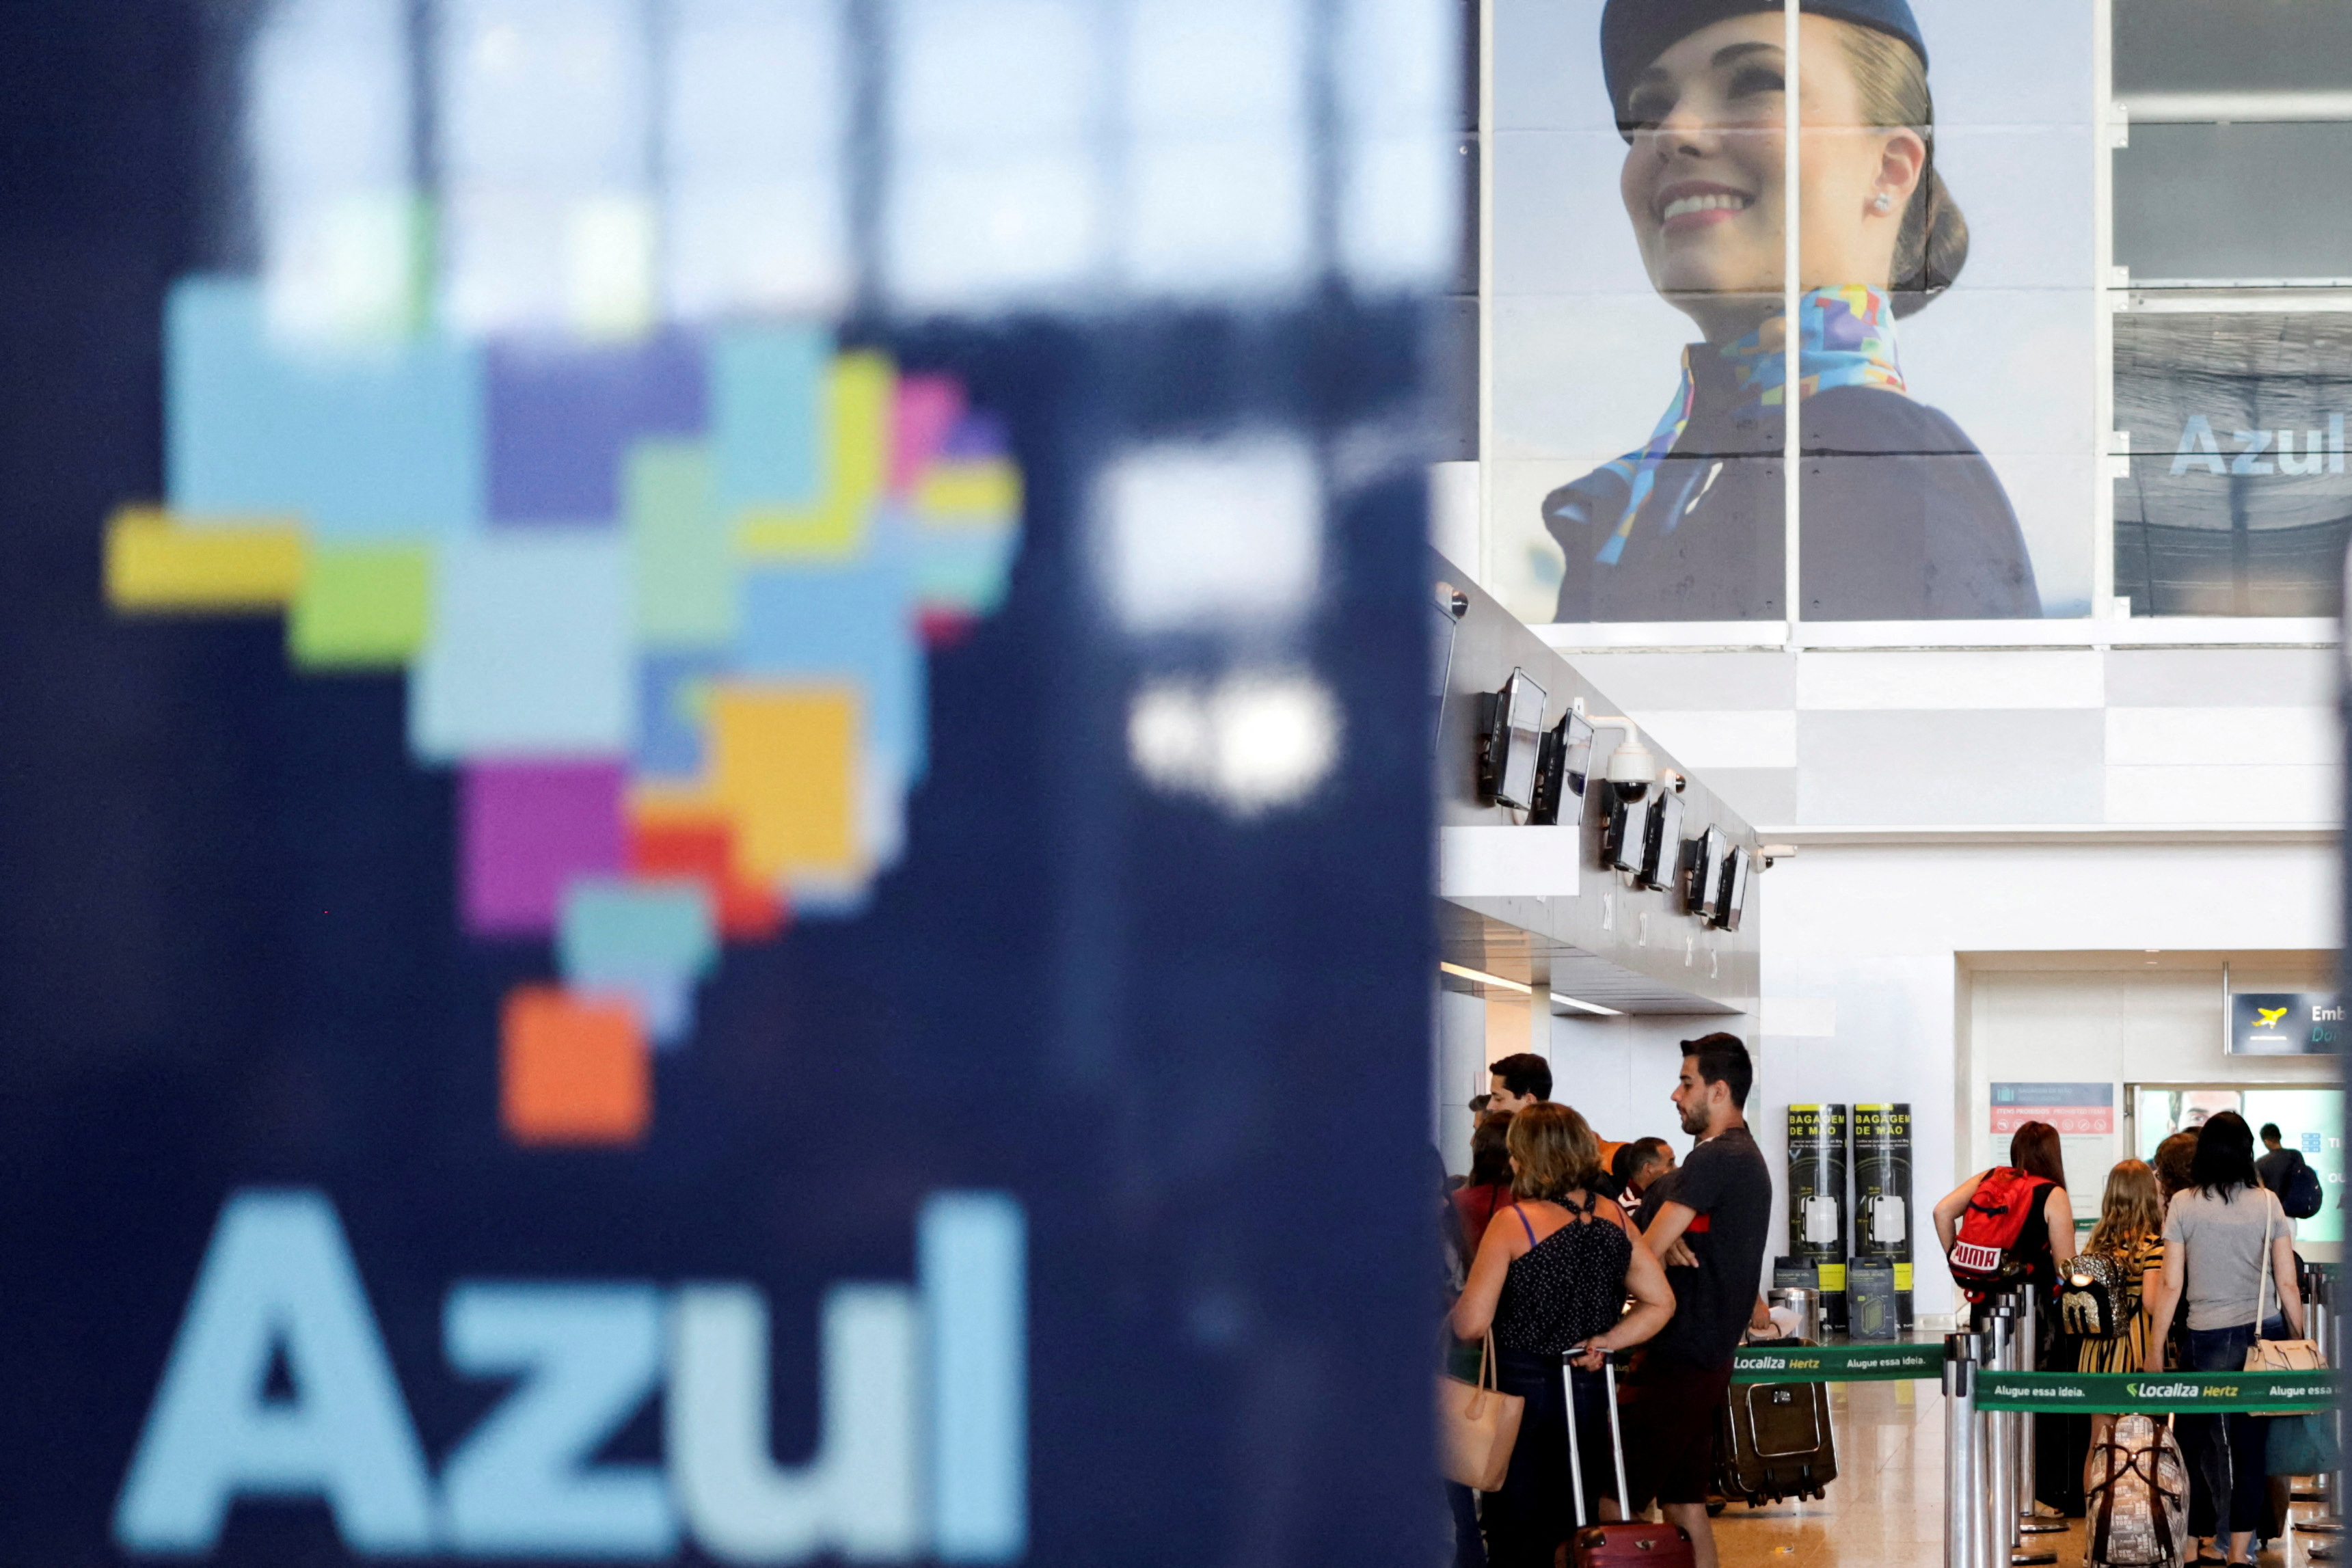 Passengers stand near a Brazilian airline Azul signage, after the airline stated that it will cut all of its international flights out from its main hub due to the coronavirus outbreak, at Viracopos International Airport, in Campinas